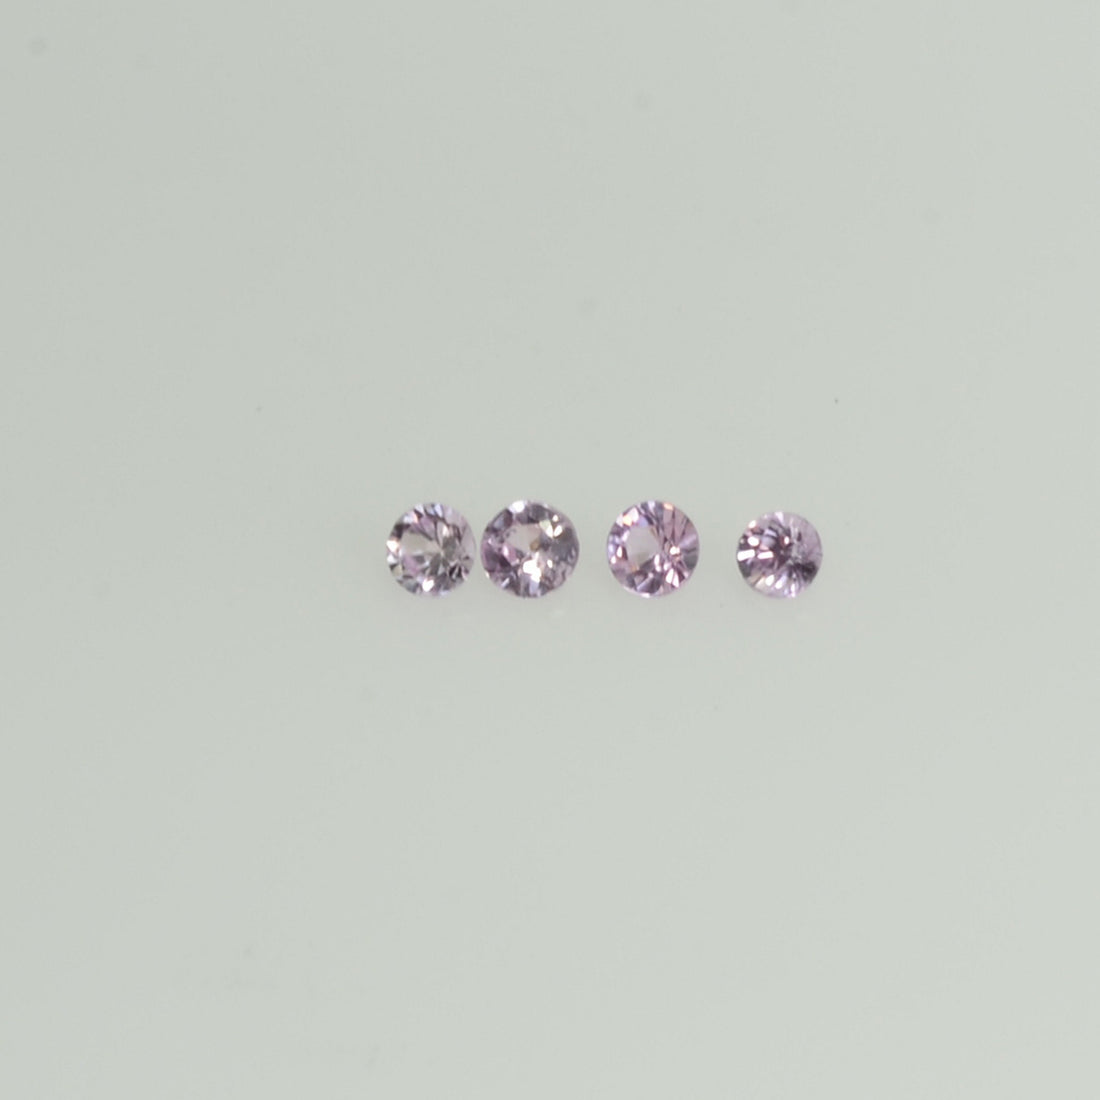 1.2-3.5 mm Natural Pink Sapphire Loose Gemstone Round Diamond Cut Cleanish Quality